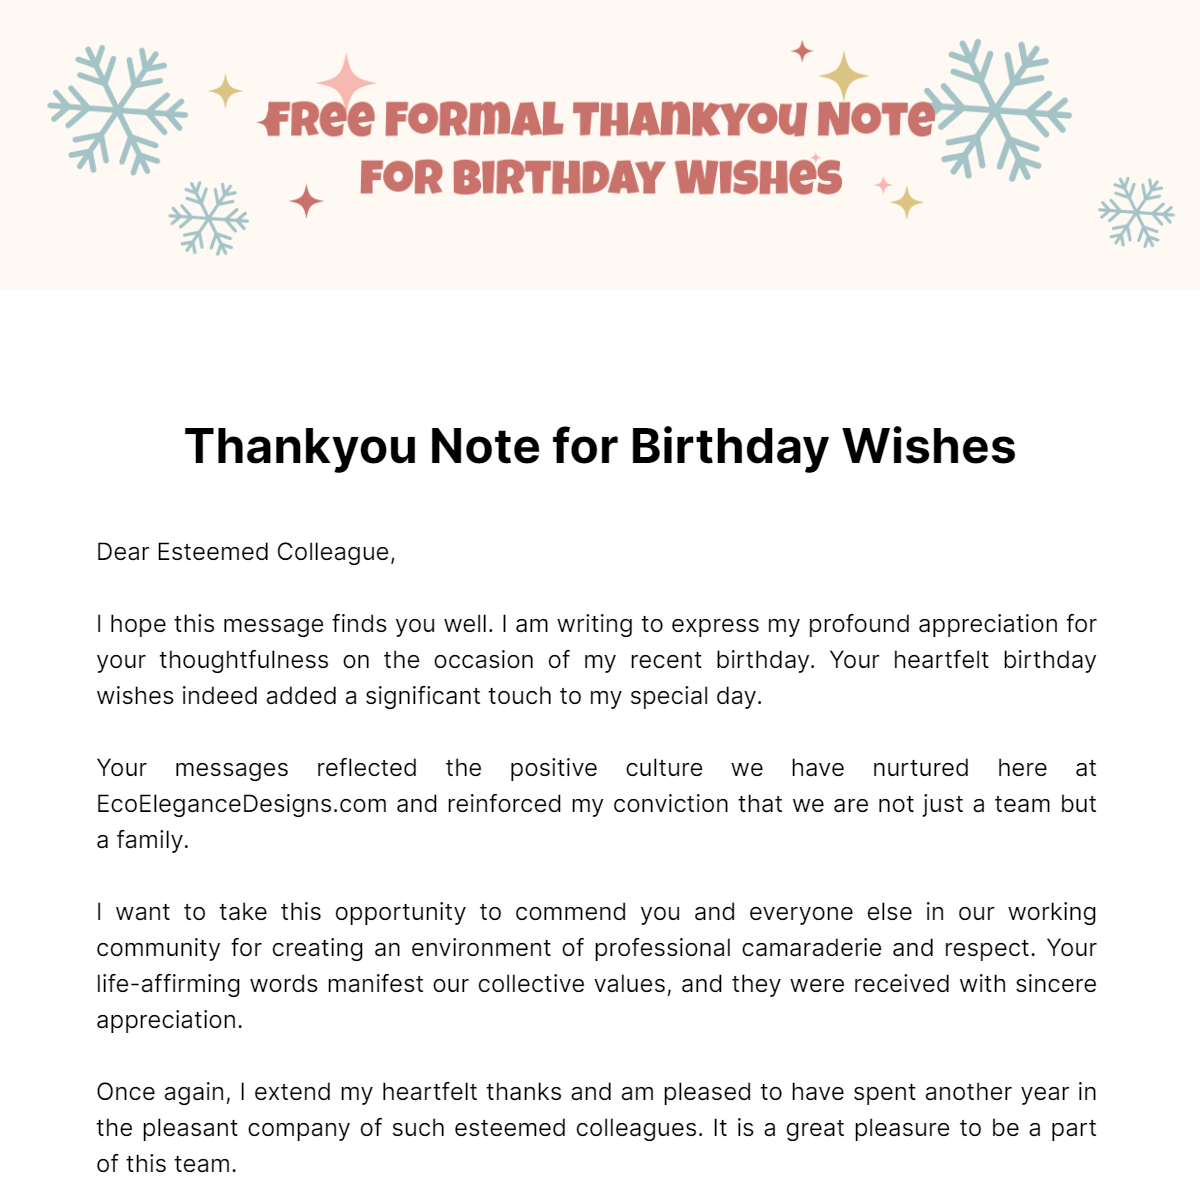 Formal Thankyou Note for Birthday Wishes Template